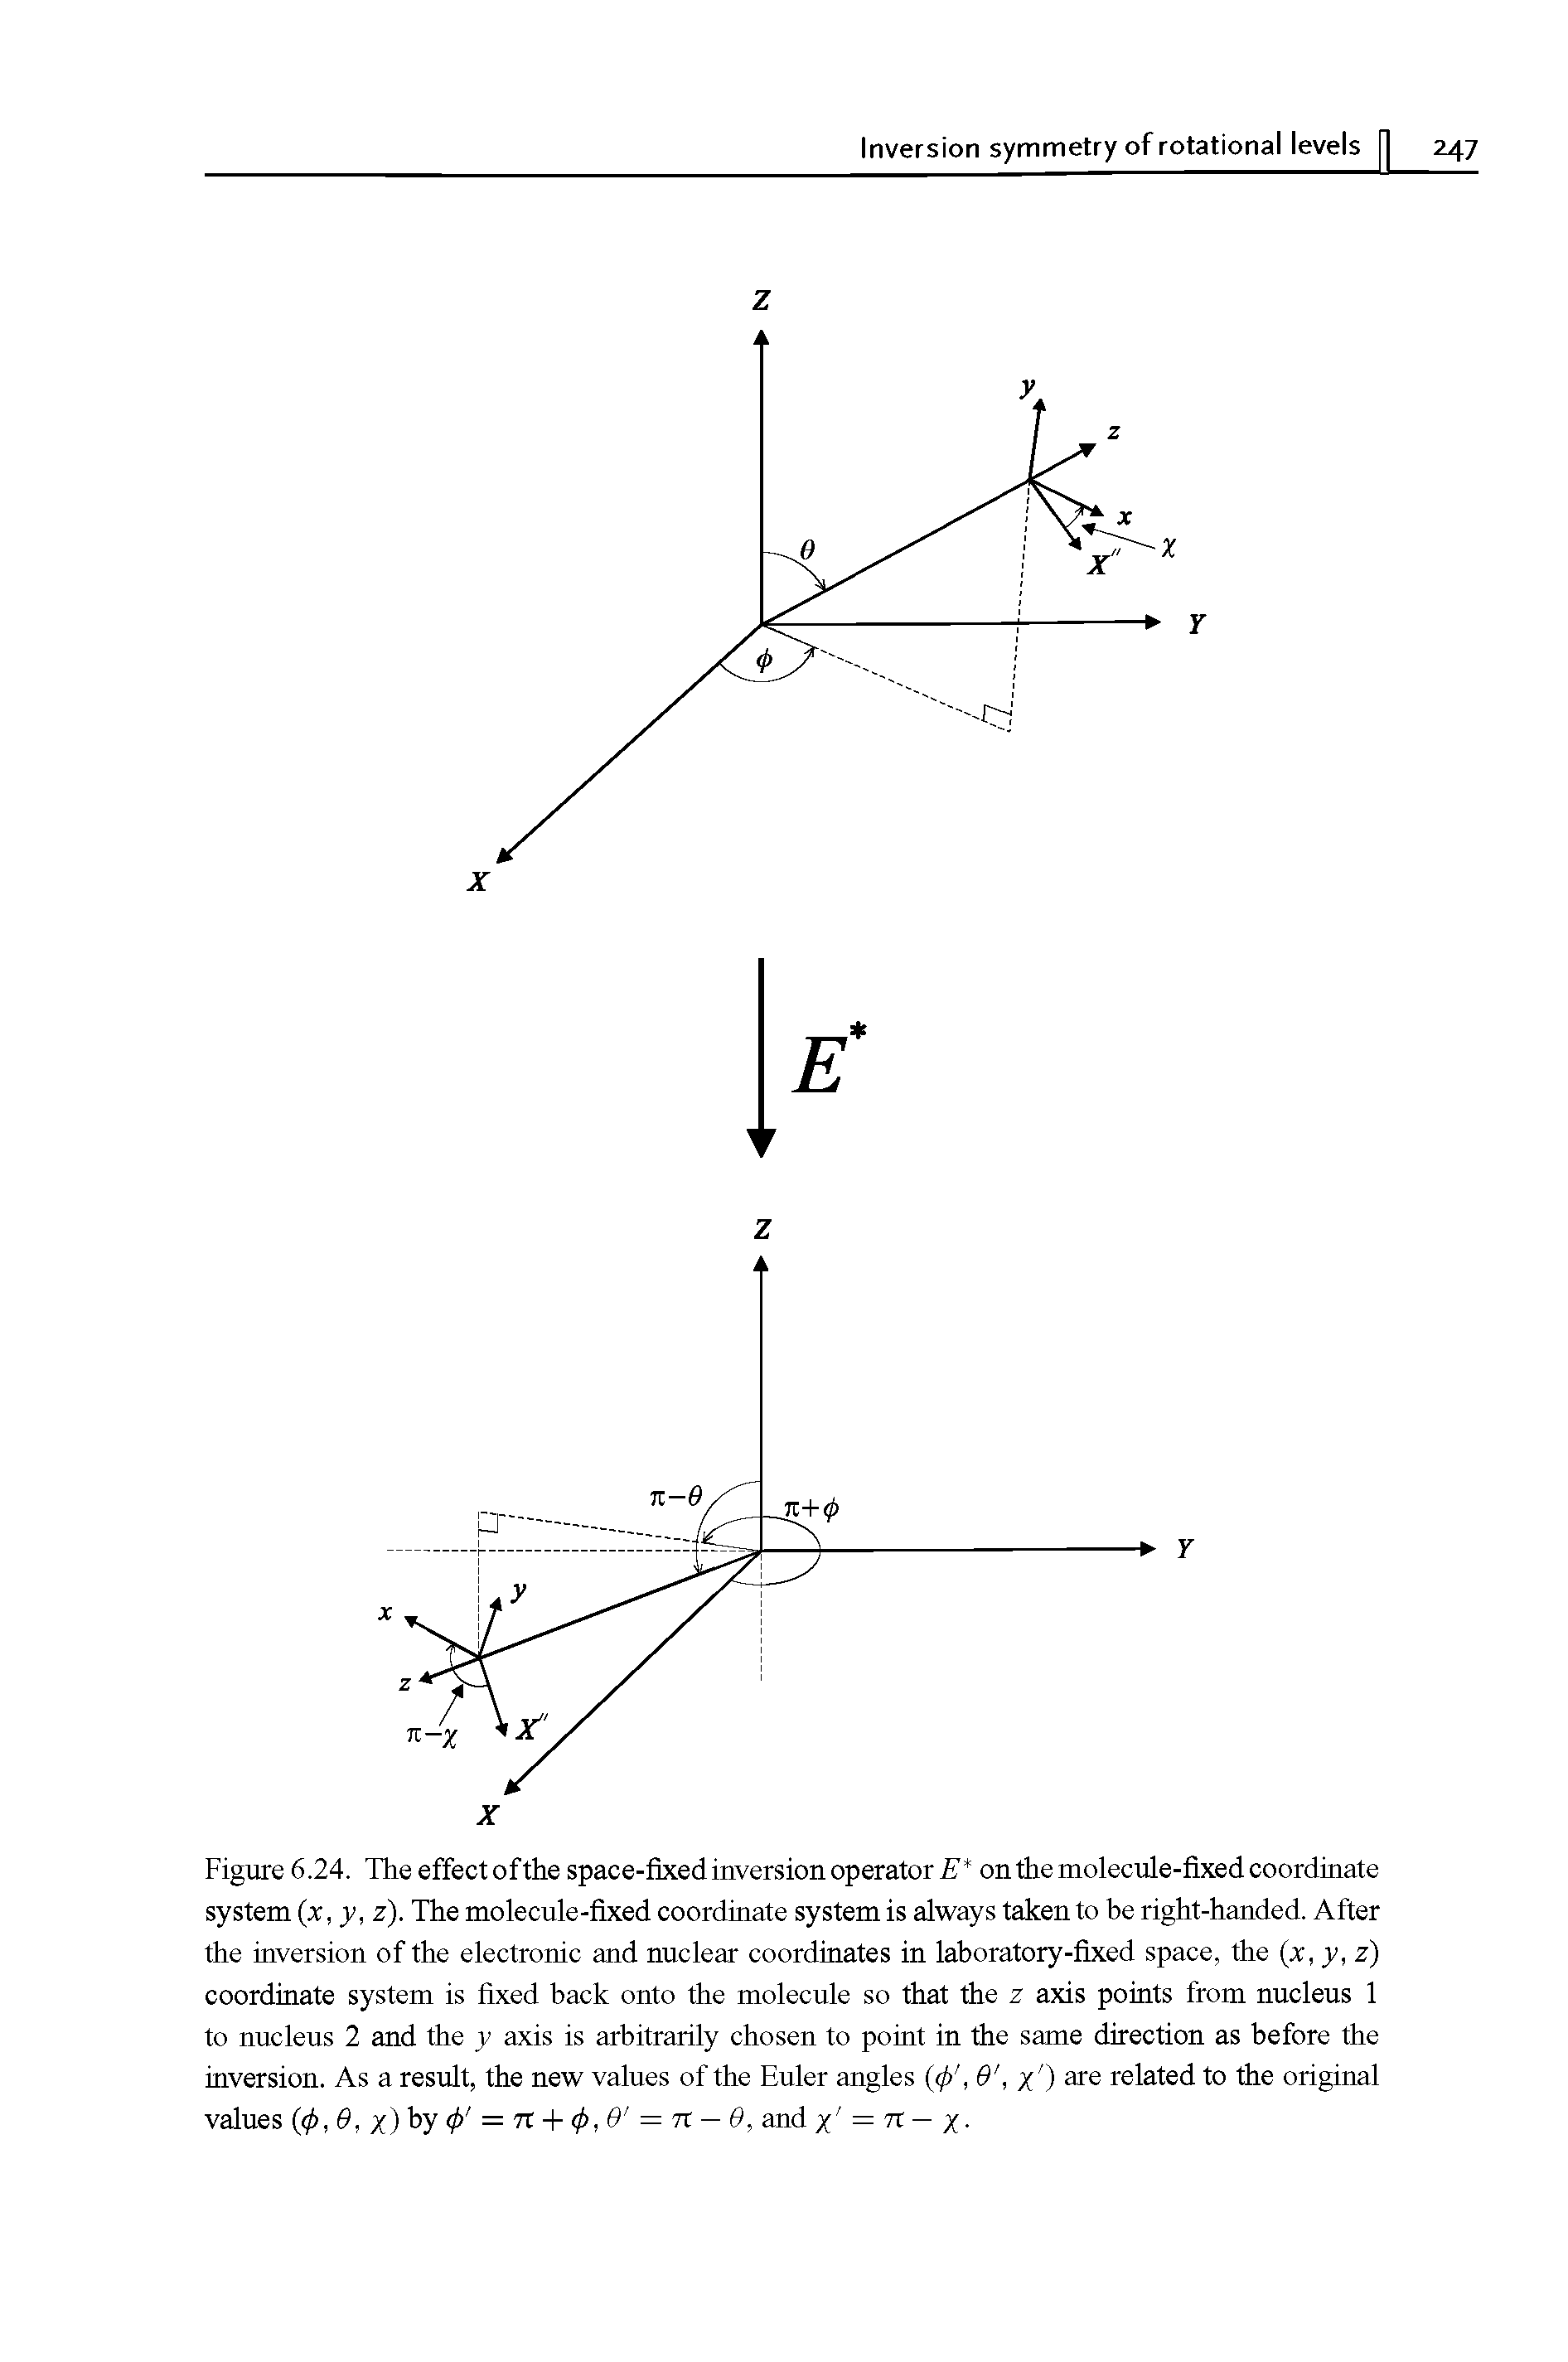 Figure 6.24. The effectofthe space-fixed inversion operator E on the molecule-fixed coordinate system (x, y, z). The molecule-fixed coordinate system is always taken to be right-handed. After the inversion of the electronic and nuclear coordinates in laboratory-fixed space, the (x, y, z) coordinate system is fixed back onto the molecule so that the z axis points from nucleus 1 to nucleus 2 and the y axis is arbitrarily chosen to point in the same direction as before the inversion. As a result, the new values of the Euler angles (ip 6, x ) are related to the original values <f>, 9, x)by <ji = n + <ji,G = n — 0, and x = n X-...